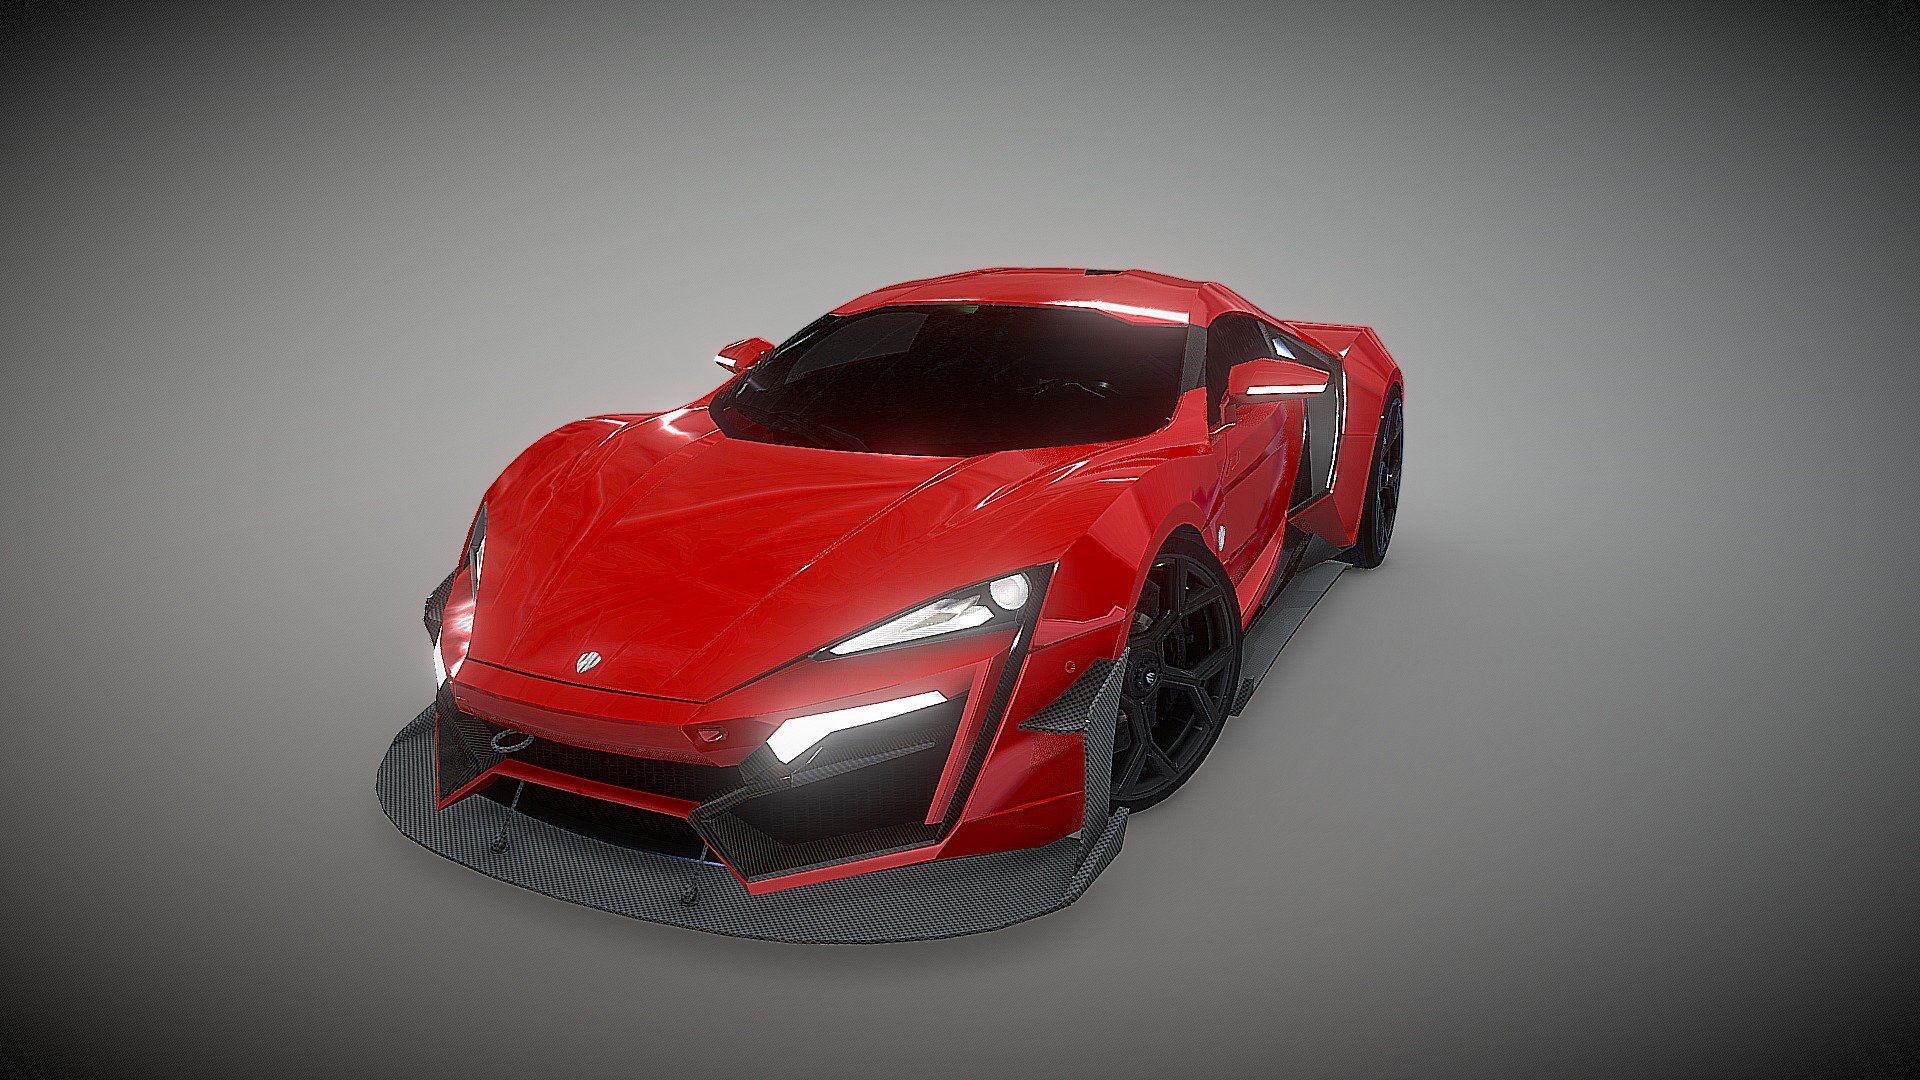 same bodykit from the hadosuka
a slightly high res model for VR in unreal, revising interior assets for actual viewing in VR mode
Dont Ask for free downloads, it will never happen! - Lykan Hypersport - 2016 - 3D model by OGL (@GaryLim) 3d model